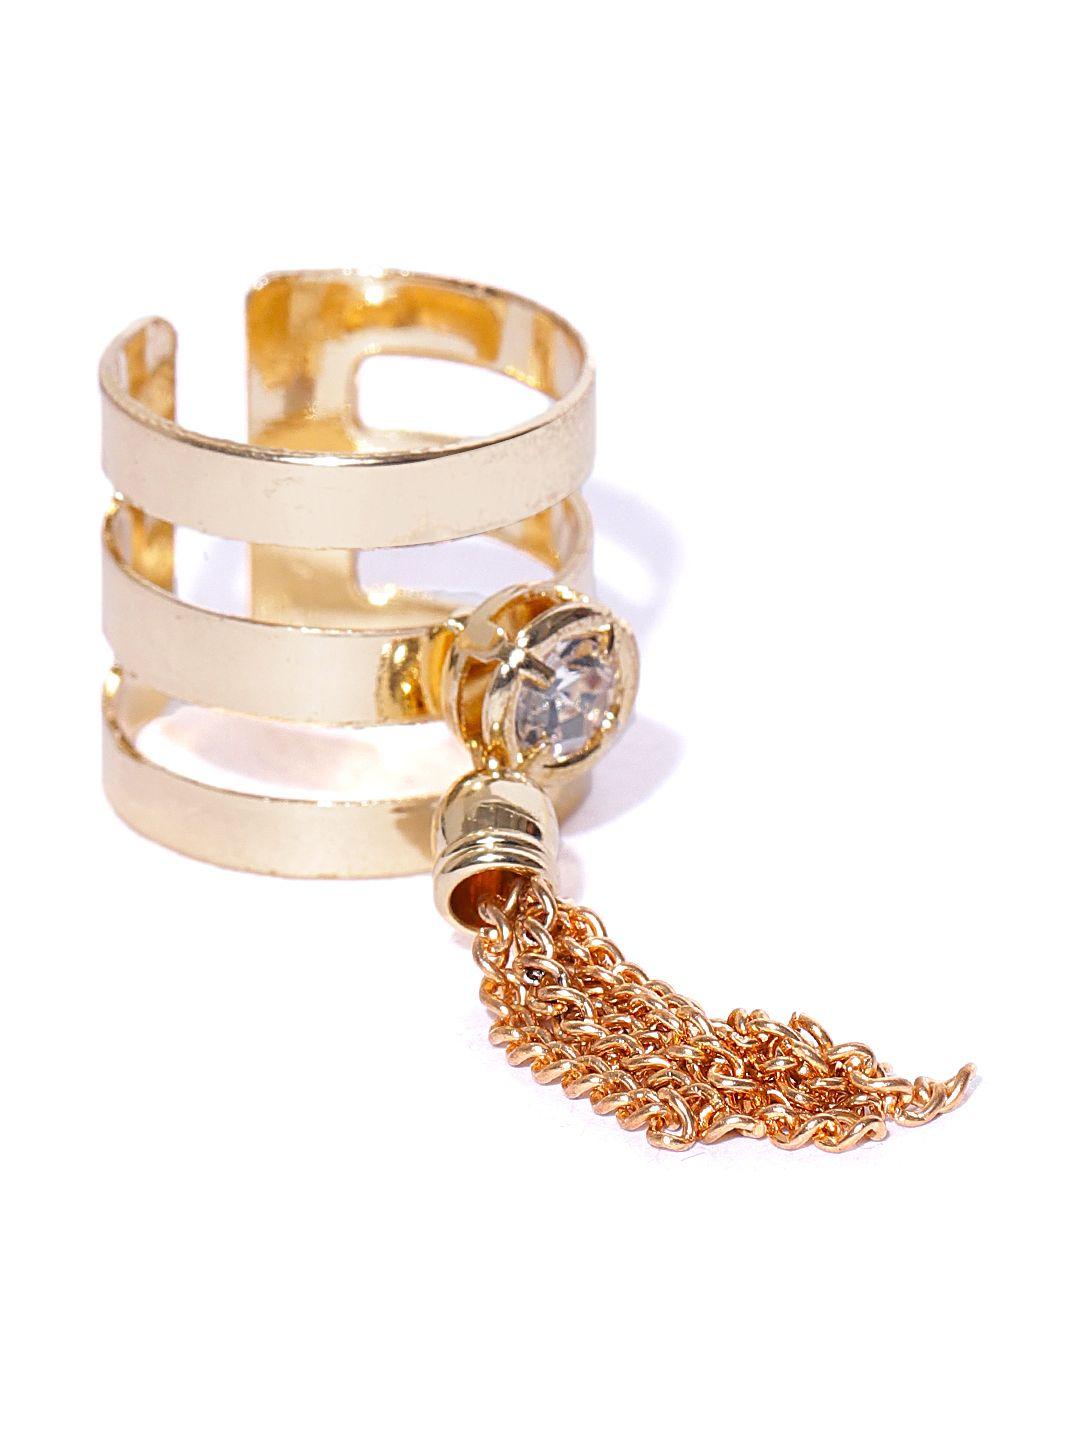 karatcart women gold-plated stone-studded adjustable finger ring with tasselled detail